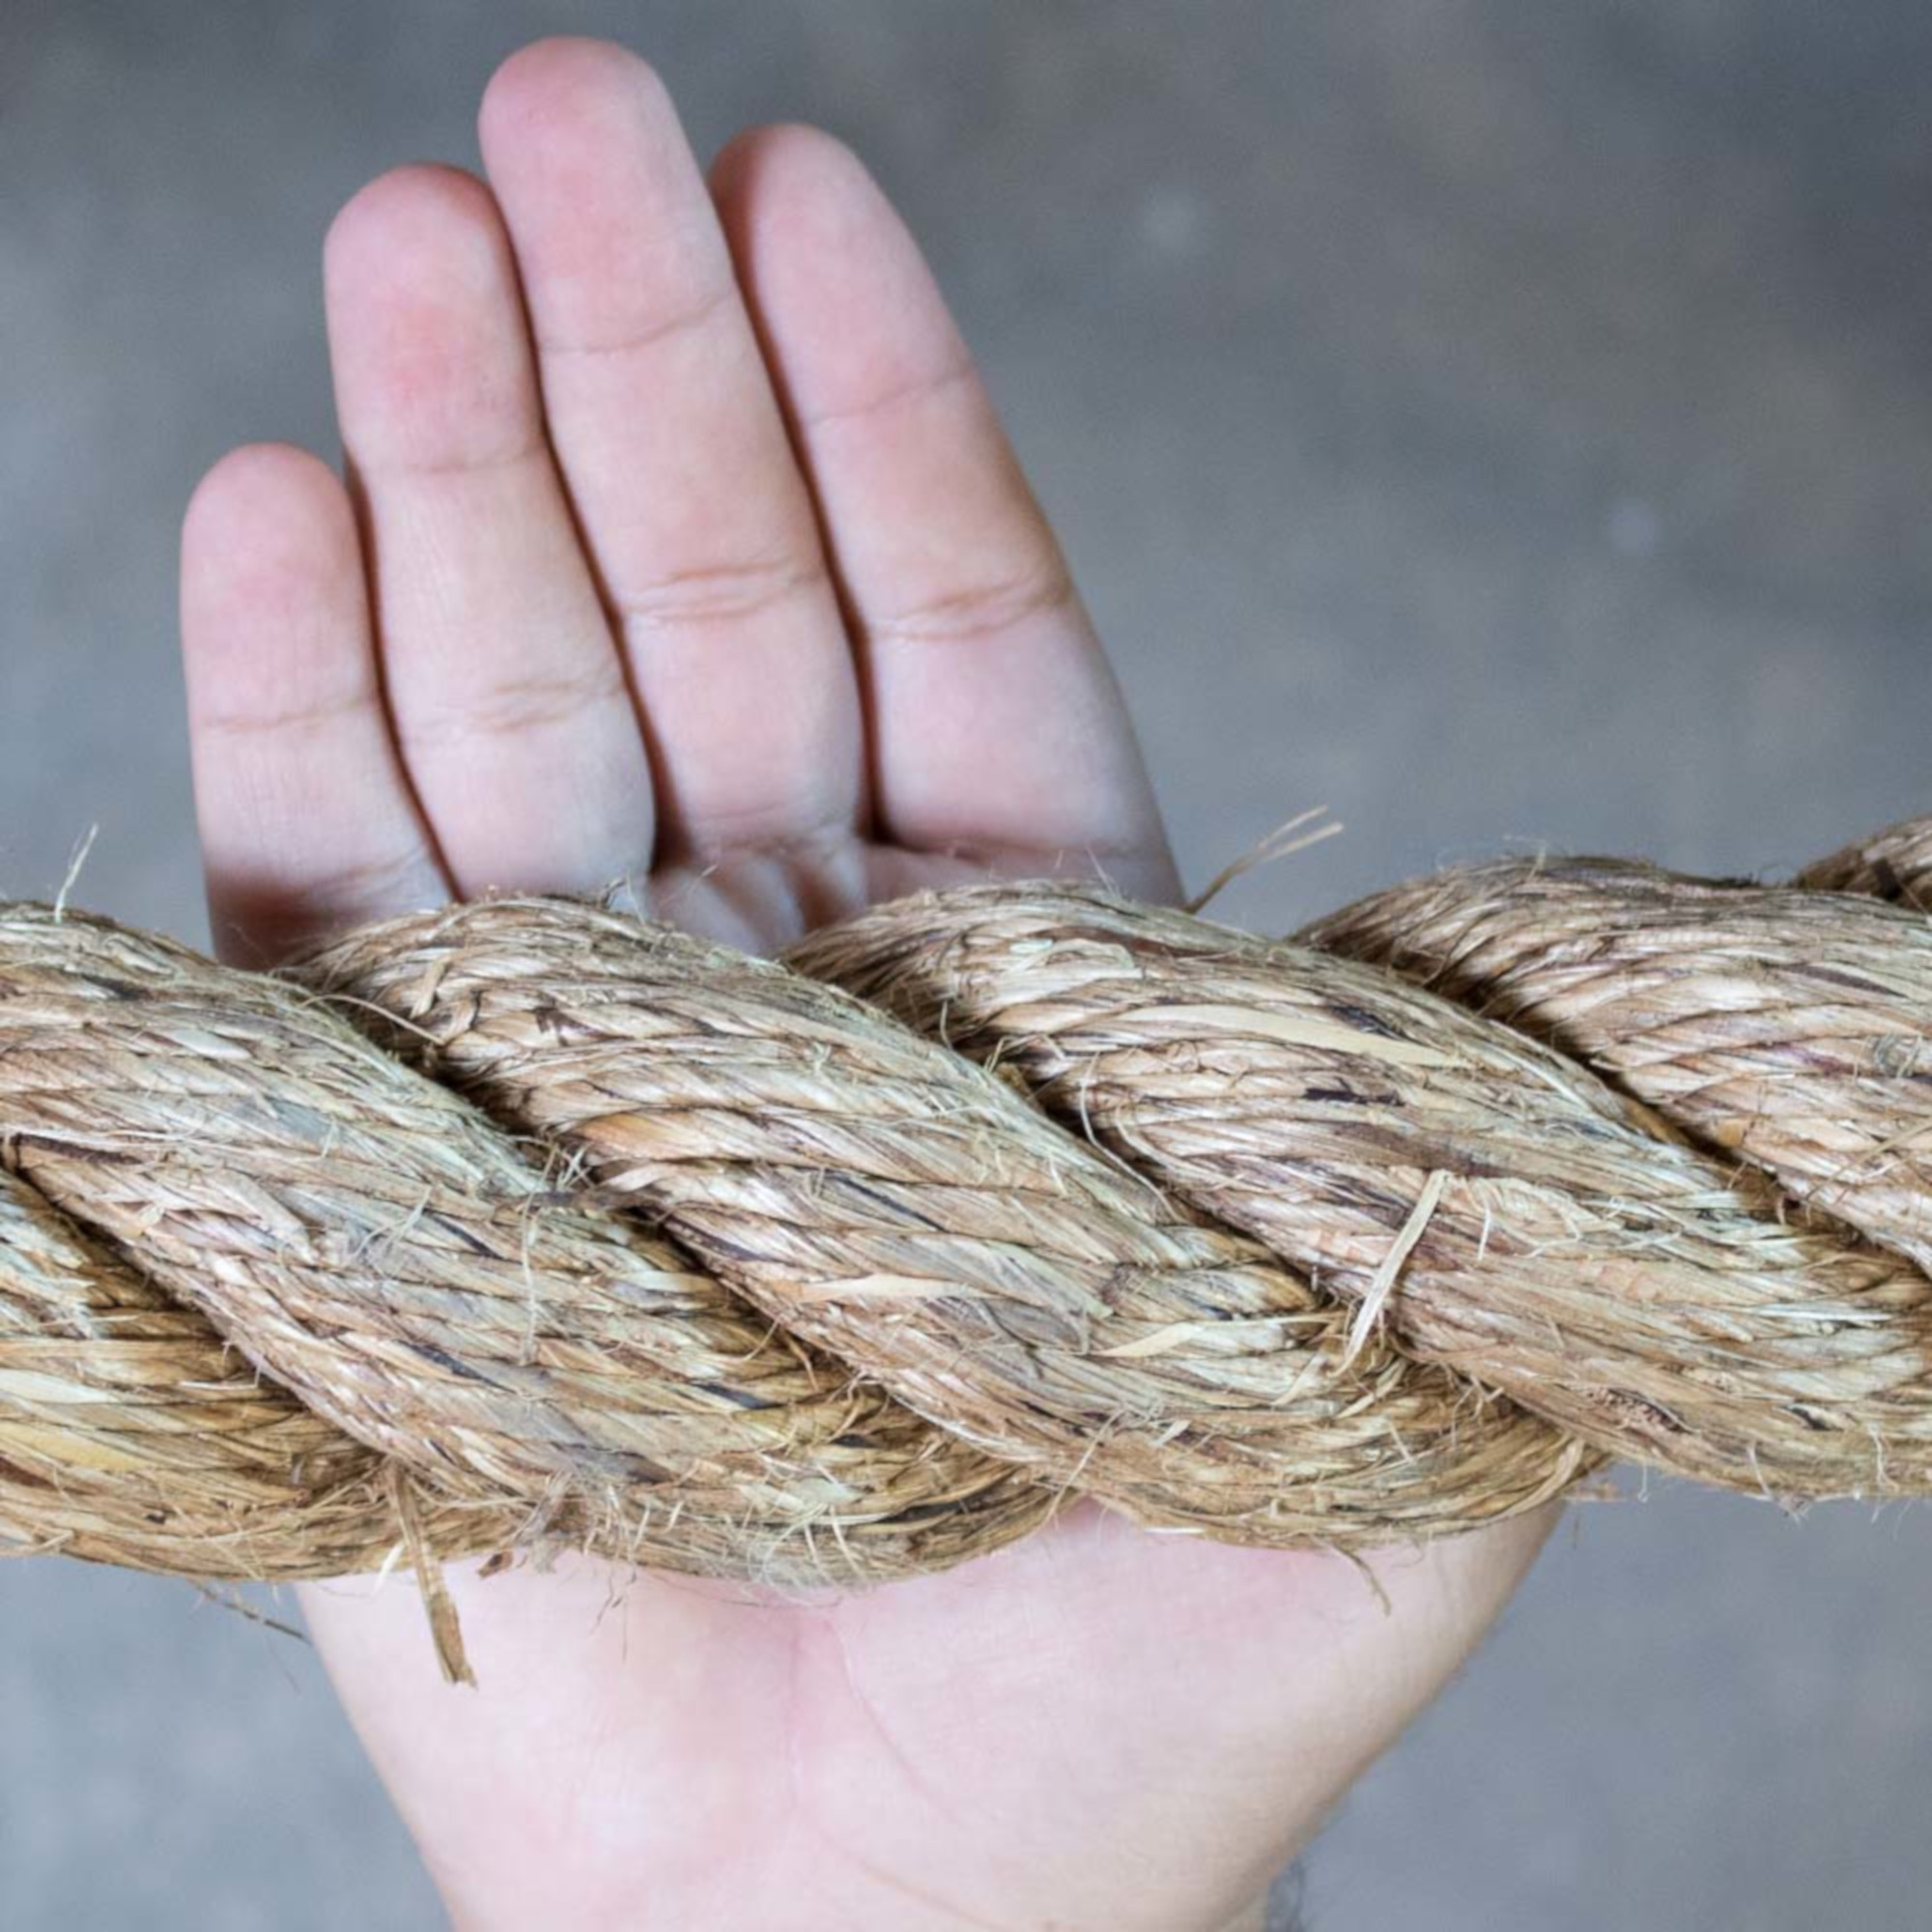 GOLBERG Manila Rope - Heavy Duty 3 Strand Natural Fiber - 1/4 inch, 5/16 inch, 3/8 inch, 1/2 inch, 5/8 inch, 3/4 inch, 1 inch, 2 inch - Available in Different Lengths - image 5 of 5